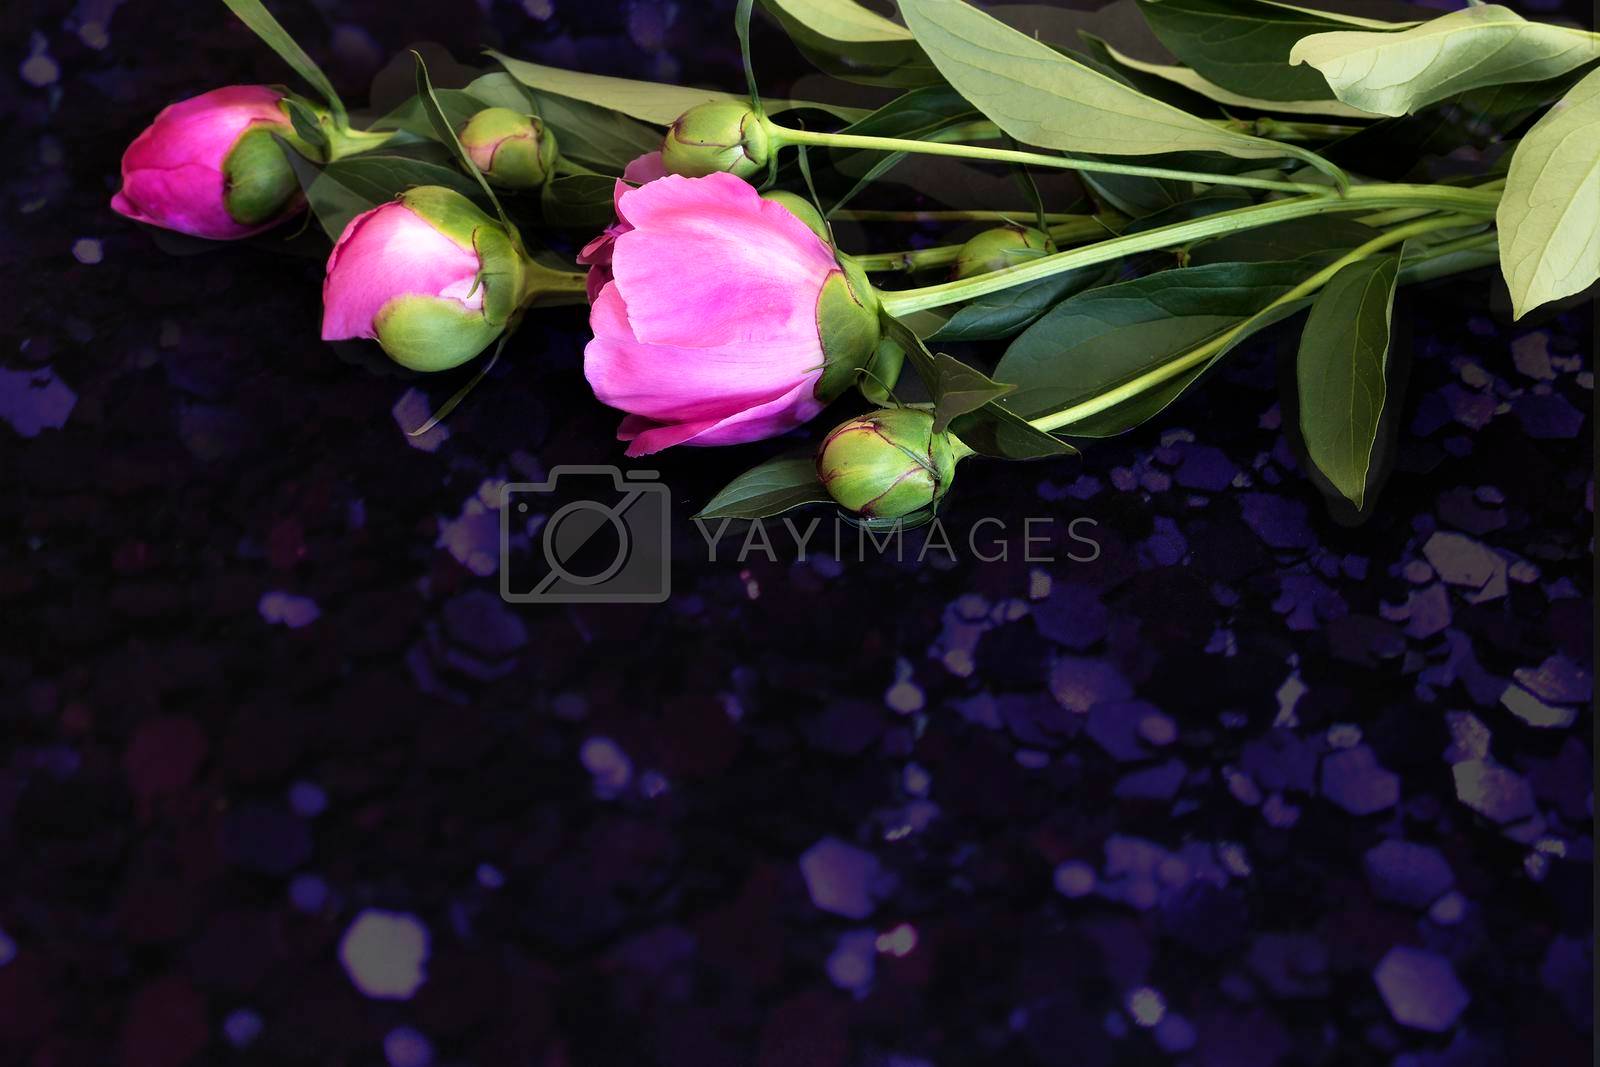 Royalty free image of Flowering peonies on a black background. by georgina198